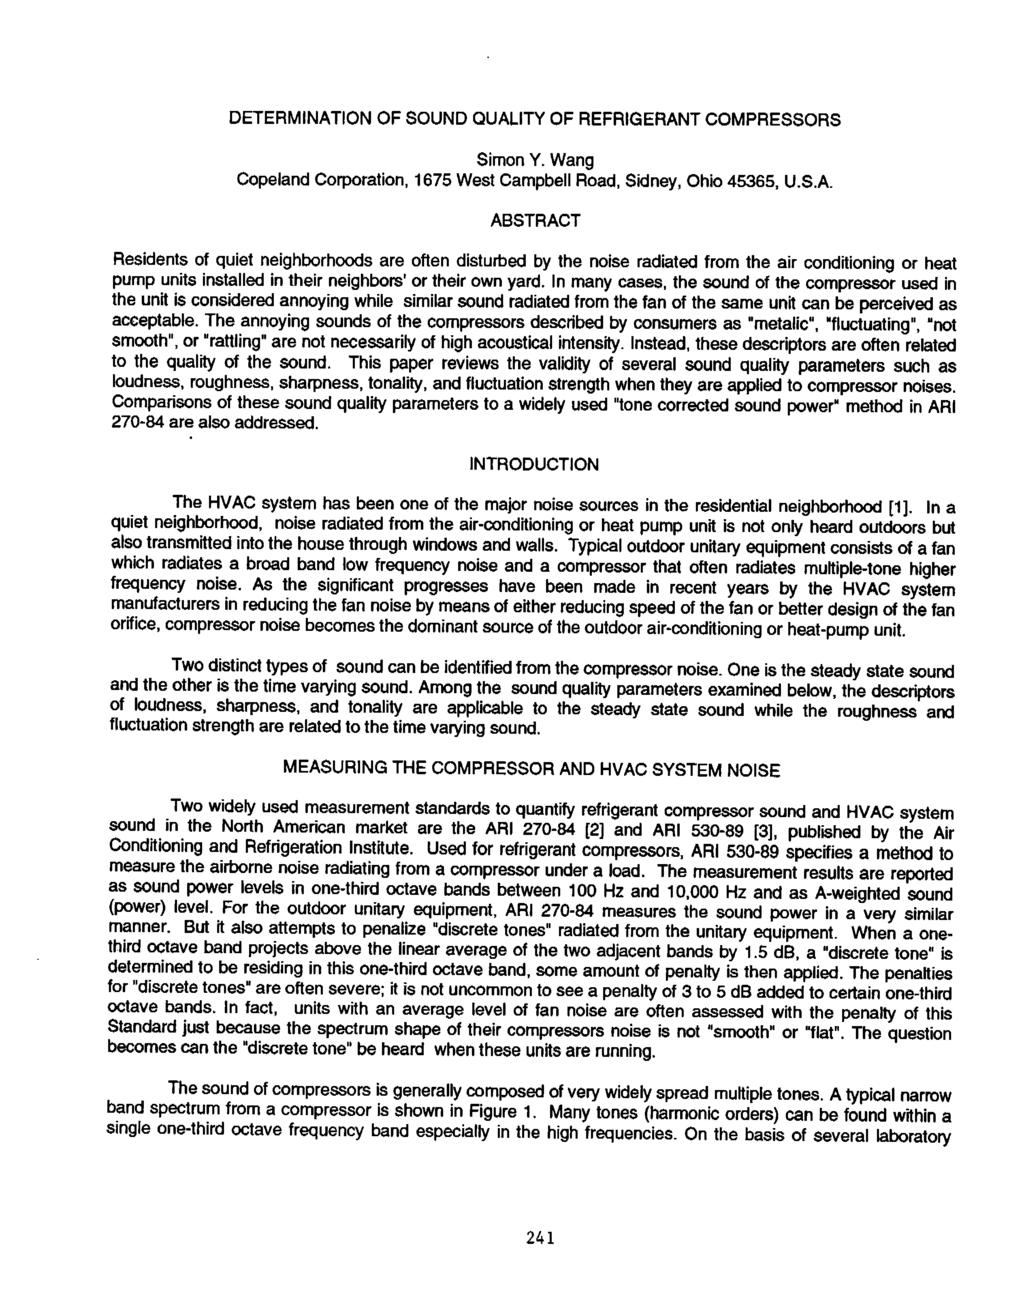 DETERMINATION OF SOUND QUALITY OF REFRIGERANT COMPRESSORS SimonY. Wang Copeland Corporation, 1675 West Campbell Road, Sidney, Ohio 45365, U.S.A. ABSTRACT Residents of quiet neighborhoods are often disturbed by the noise radiated from the air conditioning or heat pump units installed in their neighbors' or their own yard.